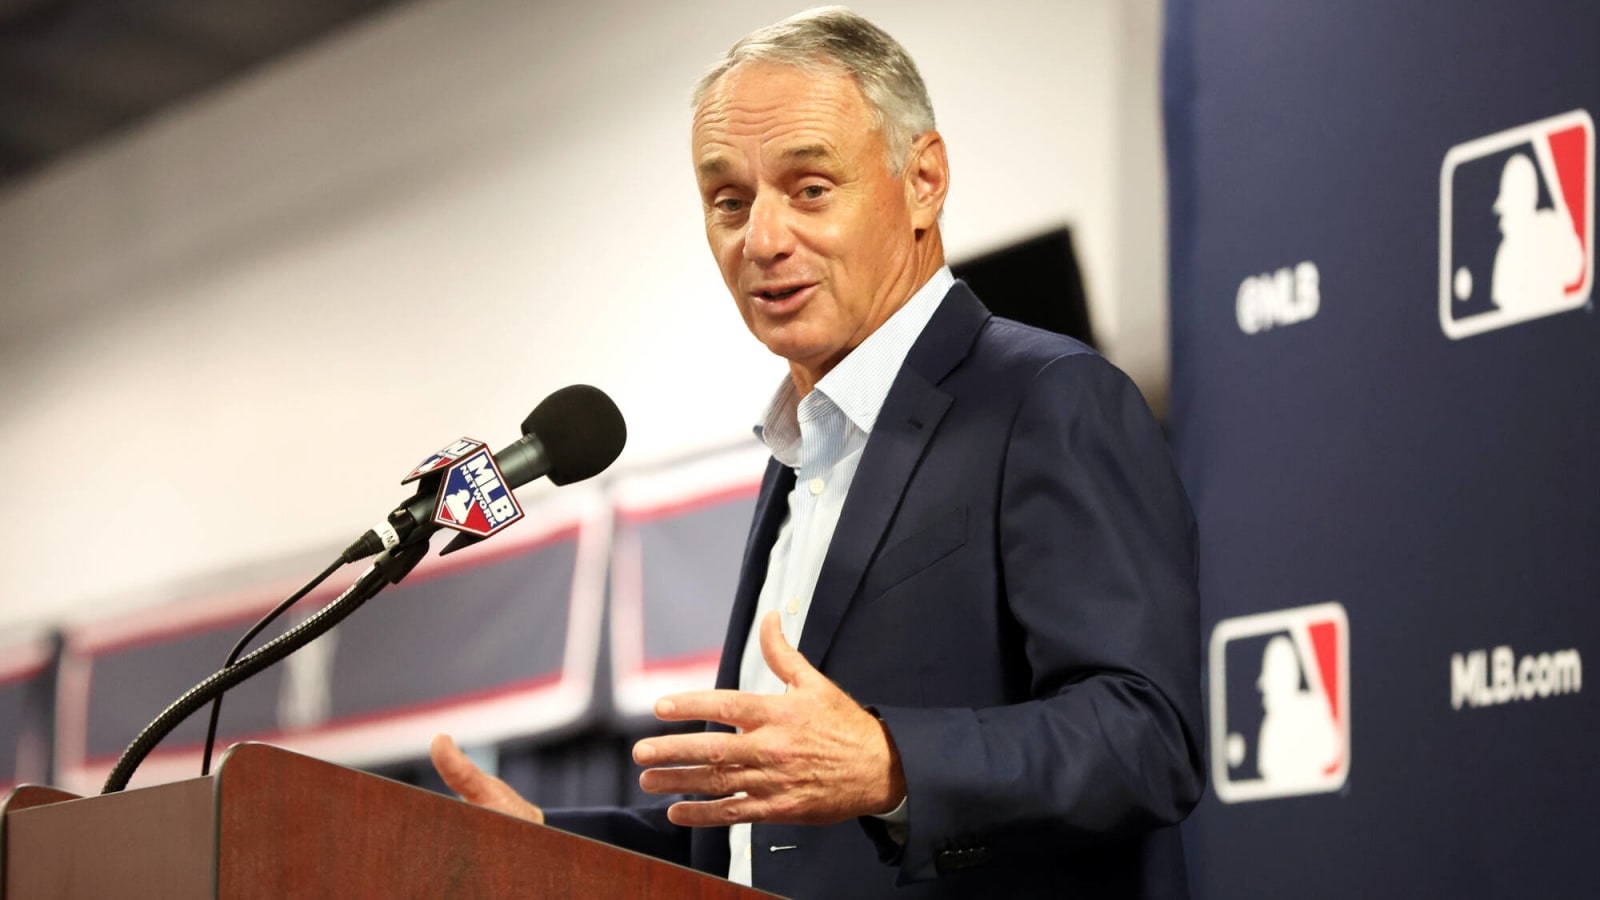 MLB owners want major change to free agency